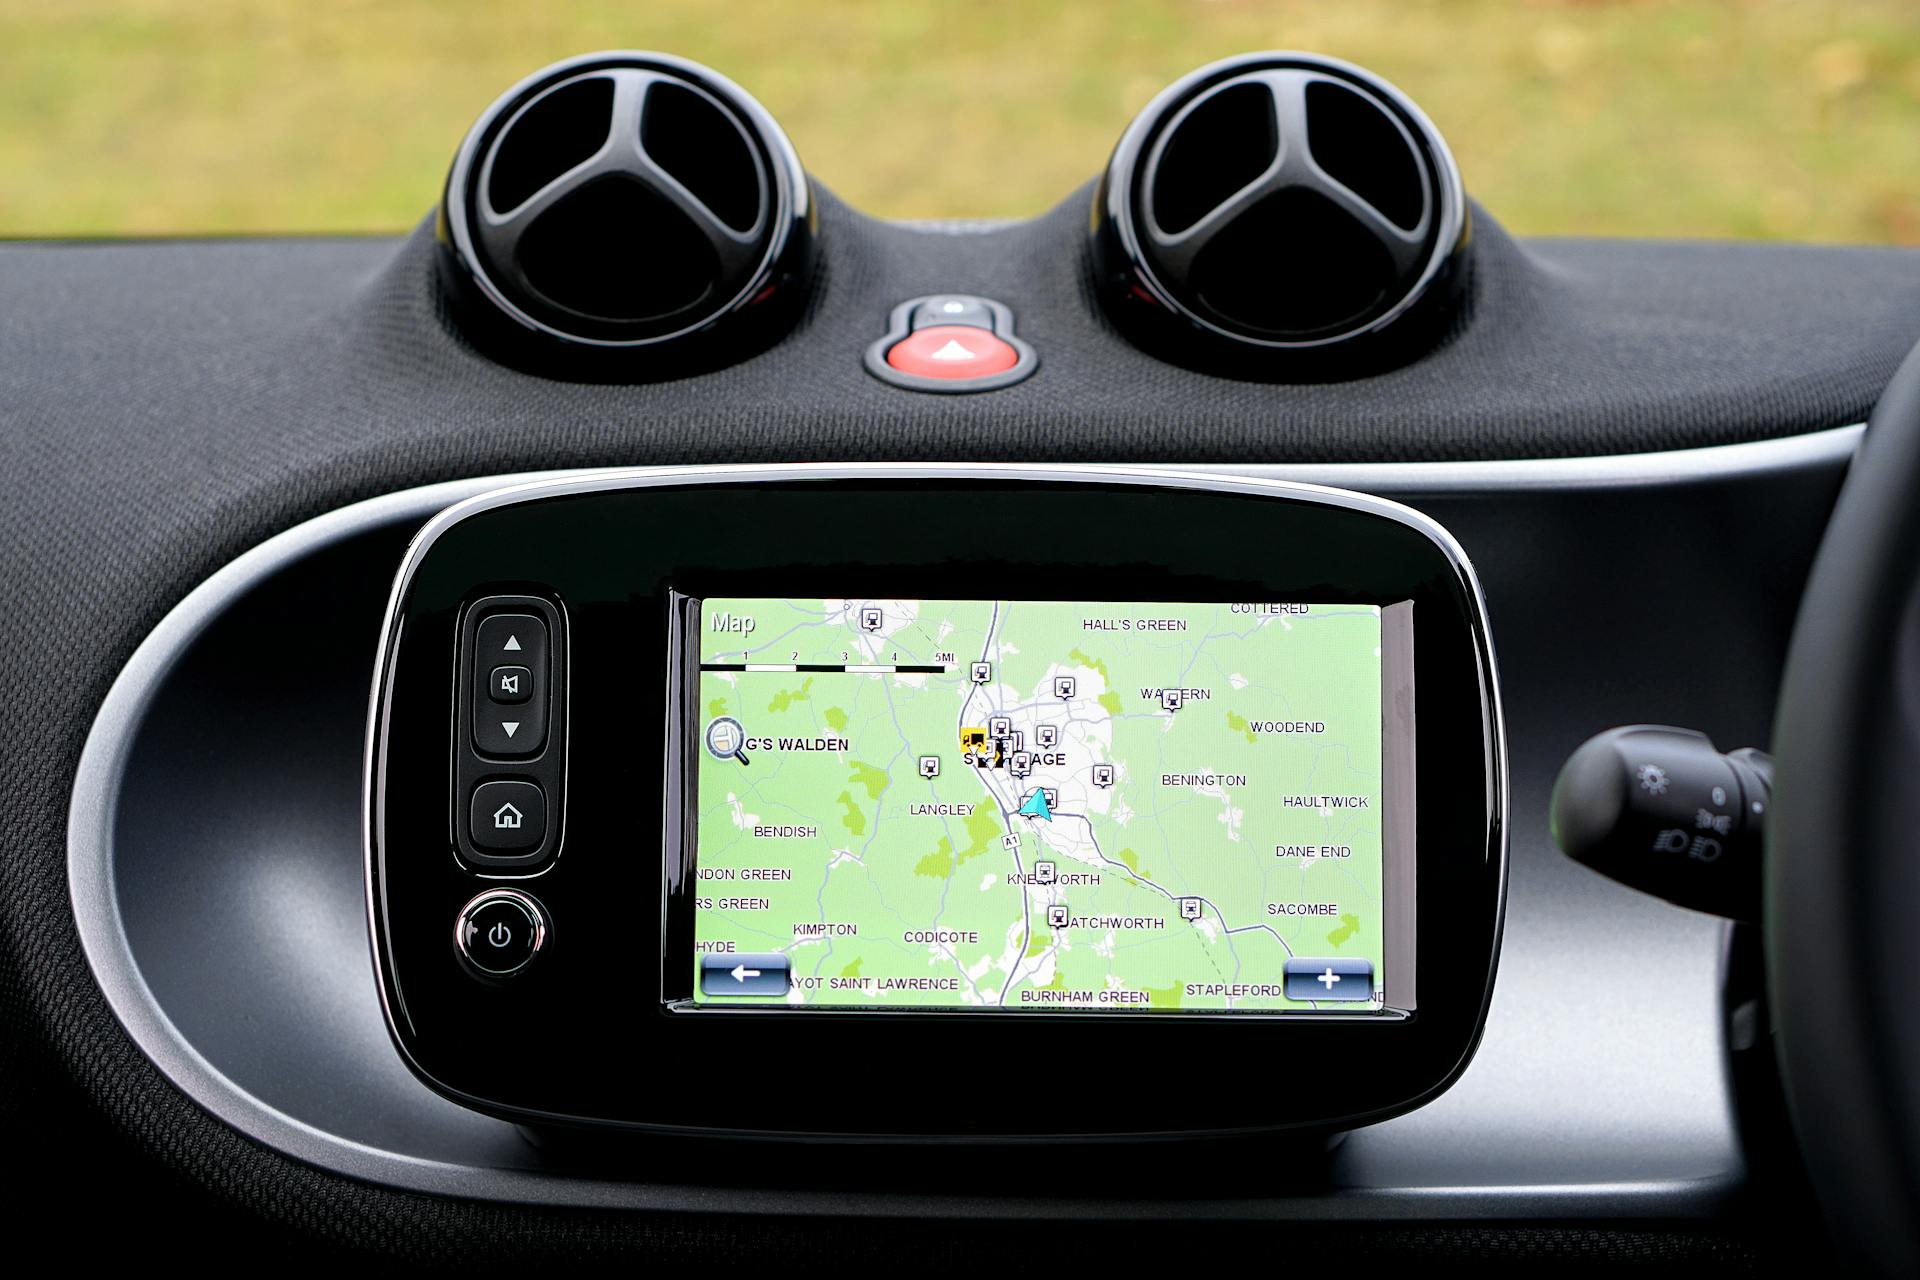 A turned-on black GPS monitor | Source: Pexels